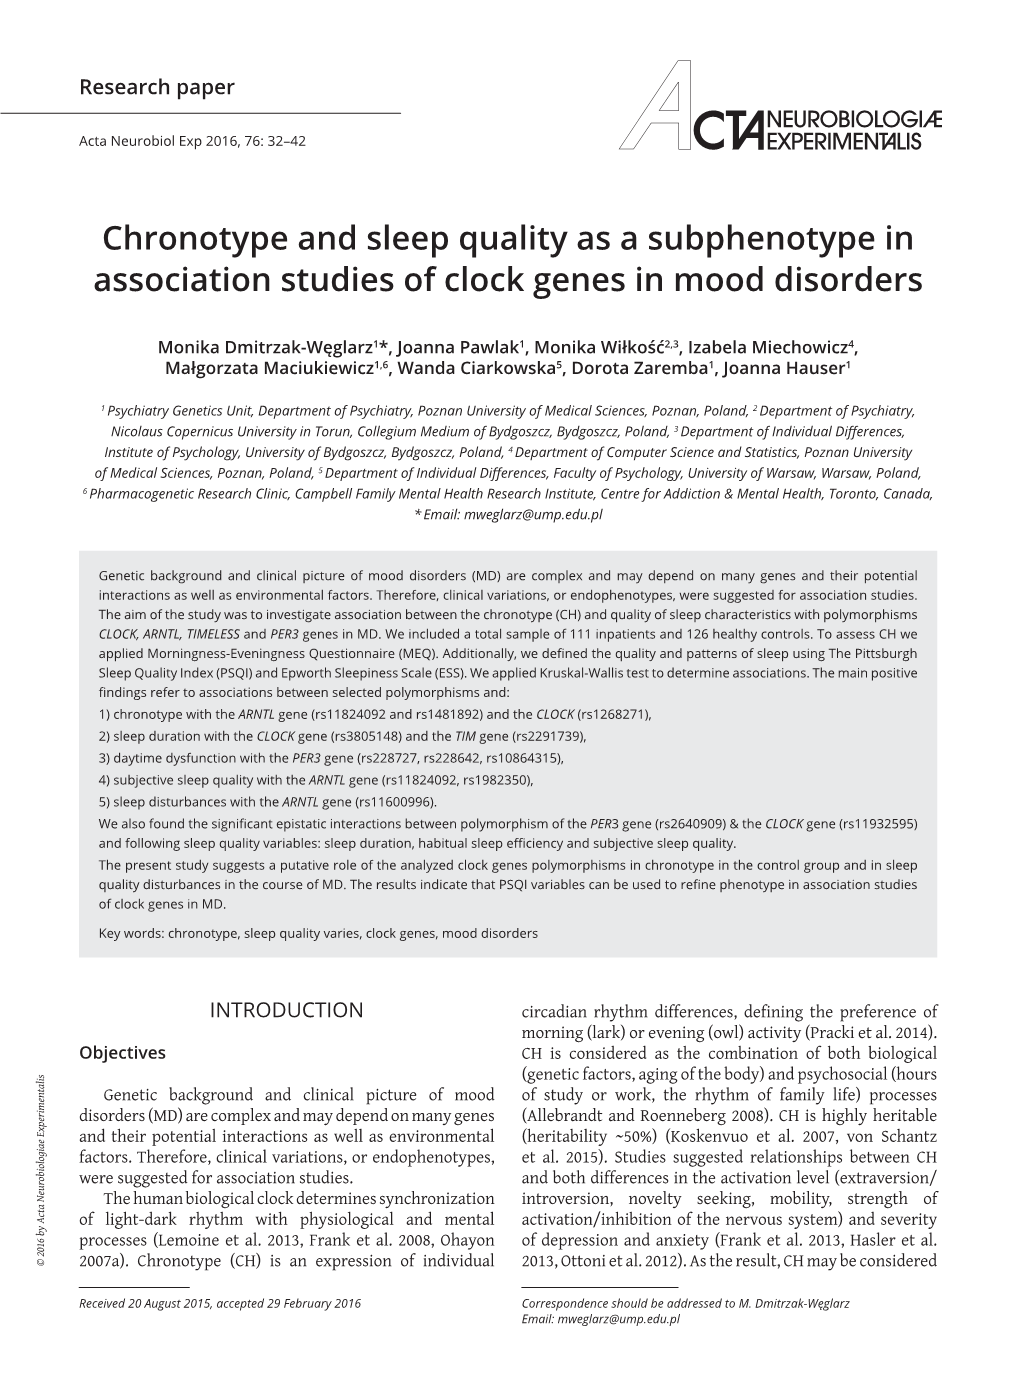 Chronotype and Sleep Quality As a Subphenotype in Association Studies of Clock Genes in Mood Disorders